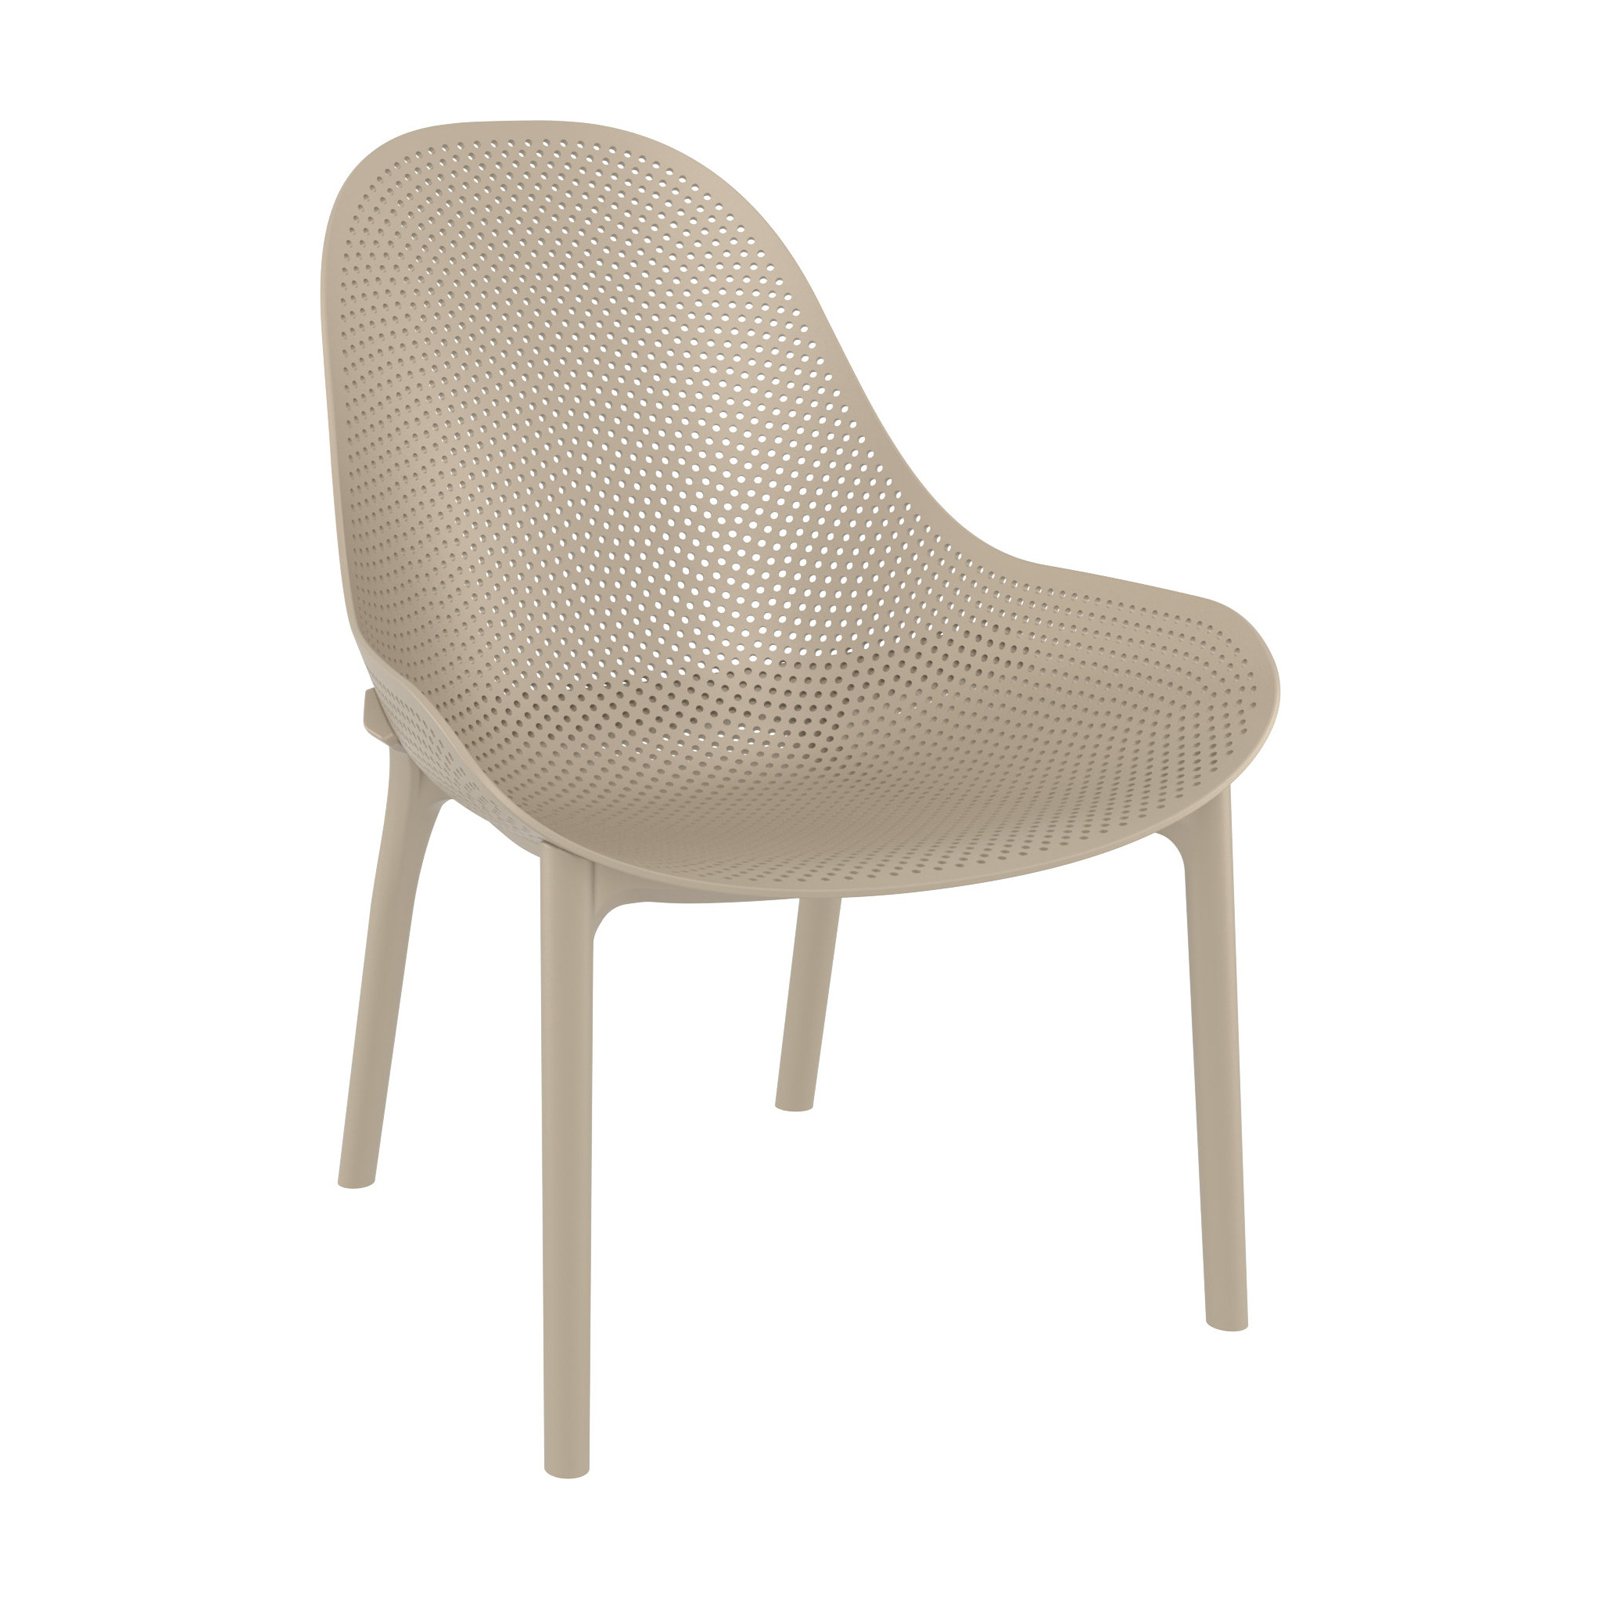 Compamia Sky Patio Chair in Taupe - image 1 of 11